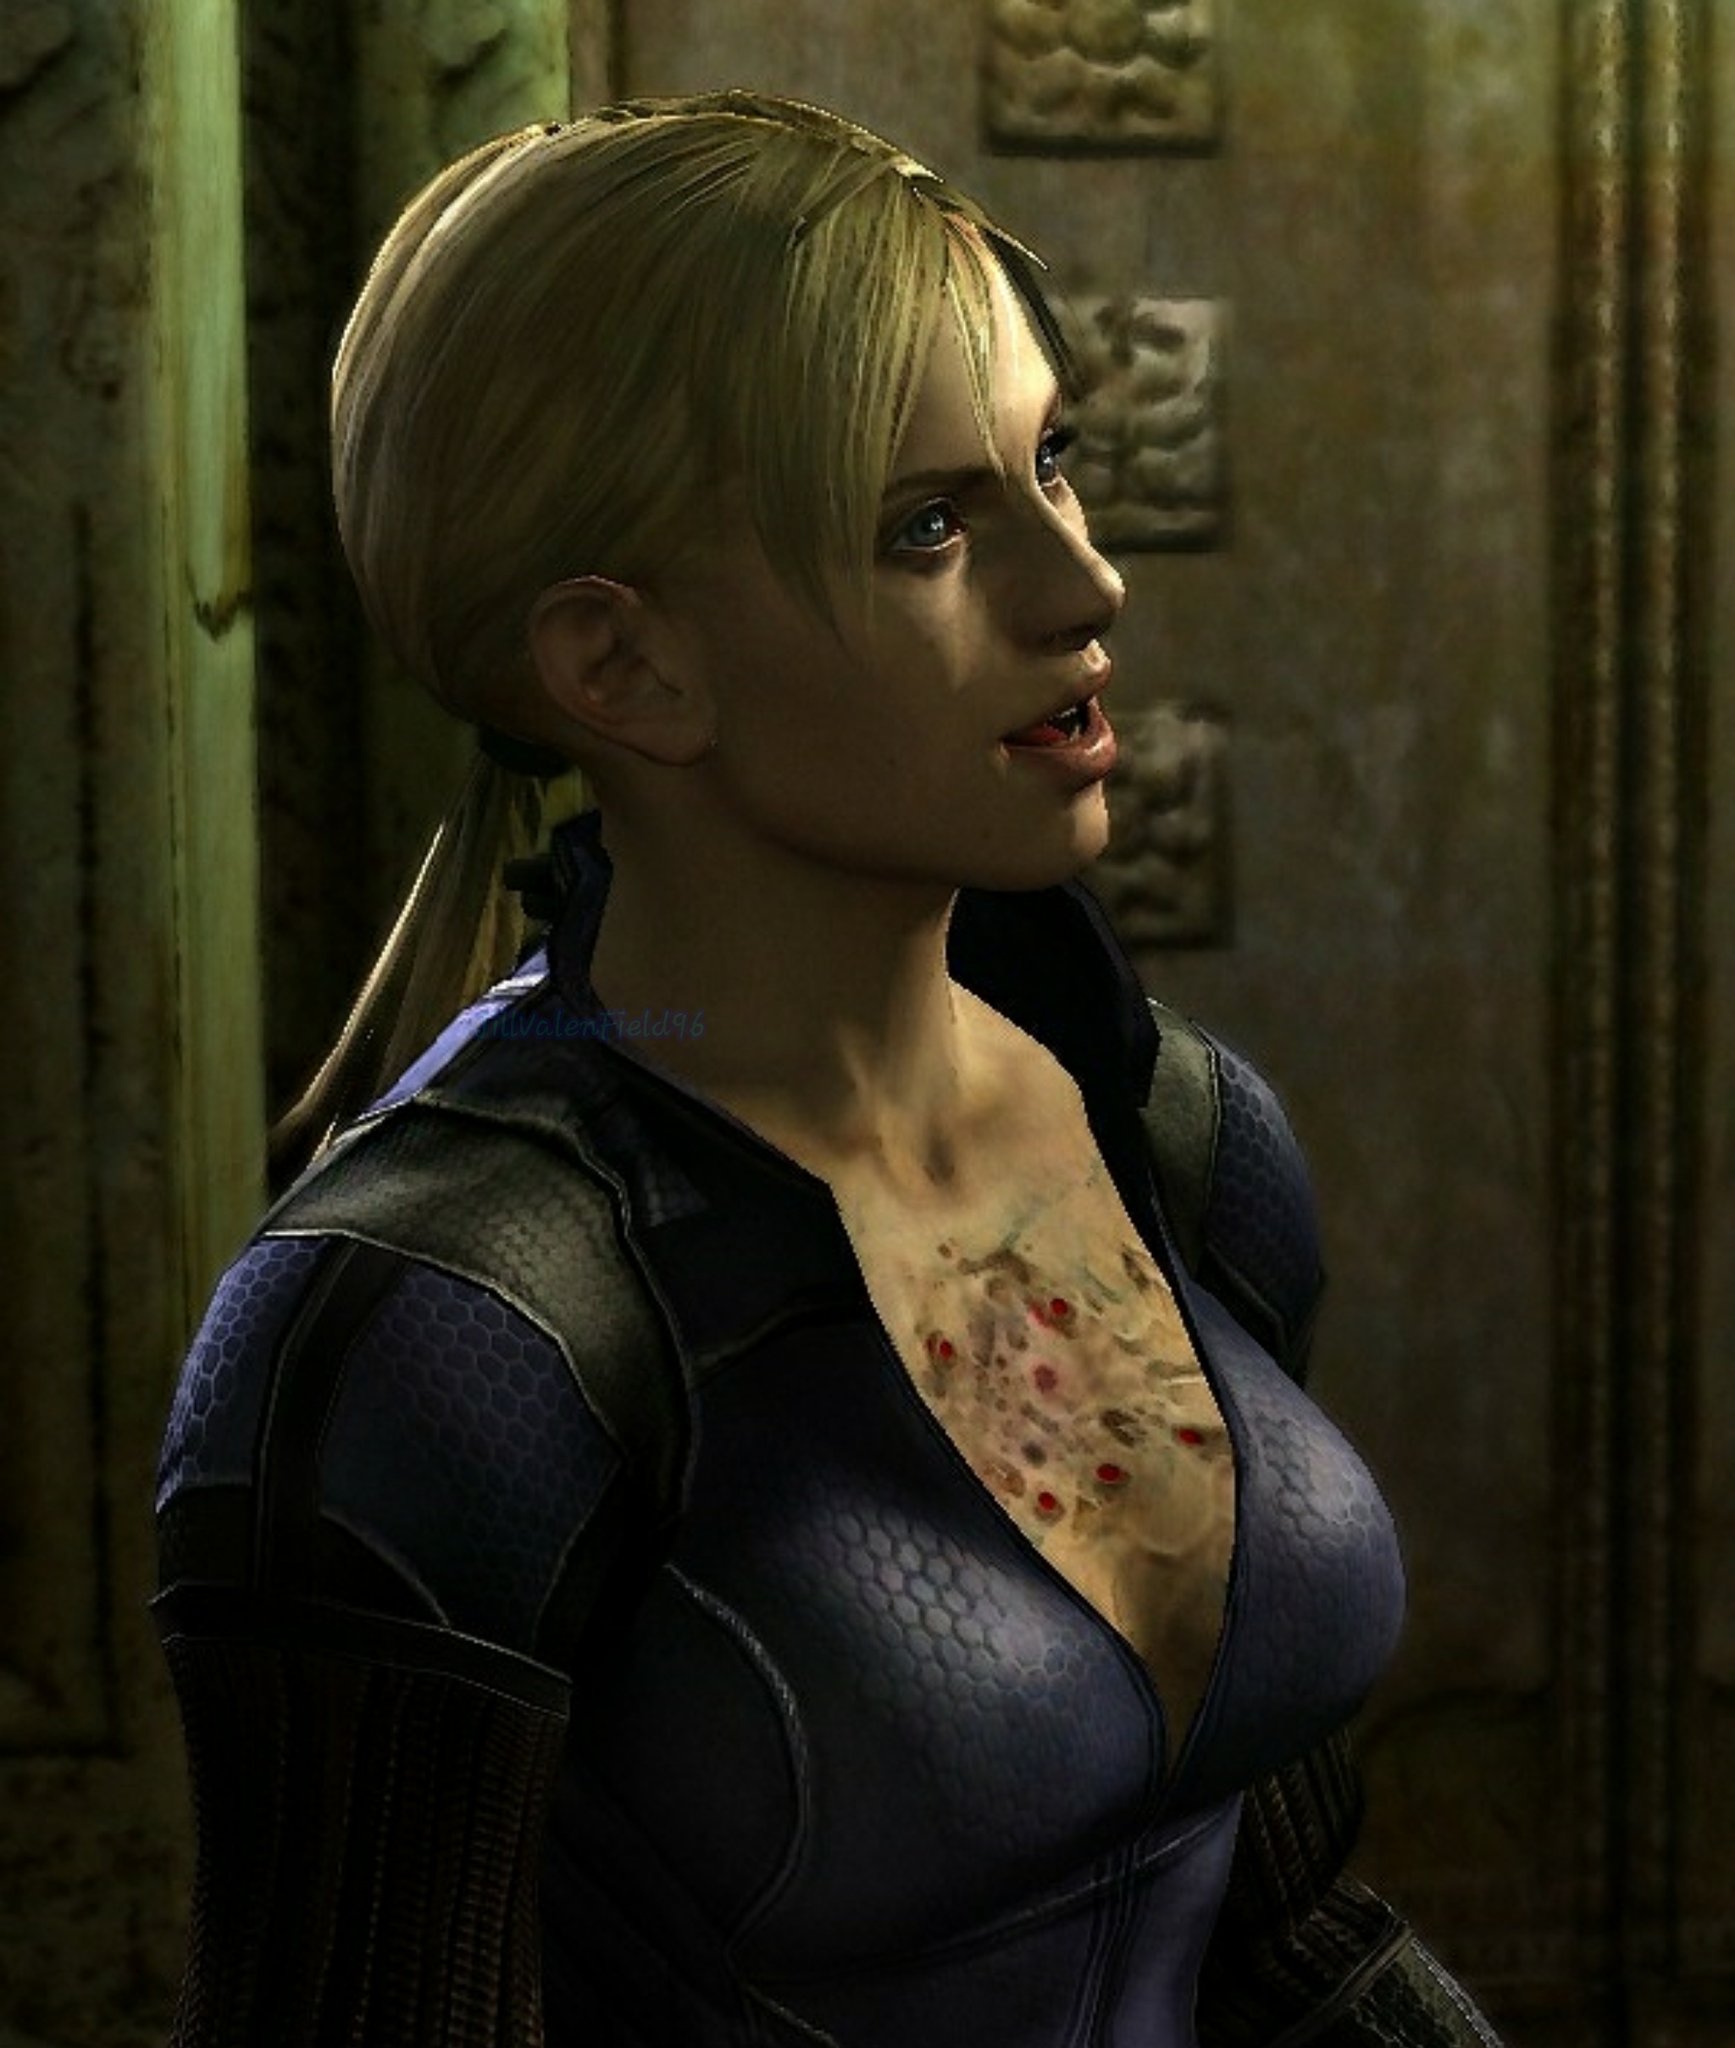 New re5 design for Jill looks STUNNING. It would fit perfectly for a  possible re5 remake plus keep Sasha as the face for re9 since Jill will be  blond : r/residentevil